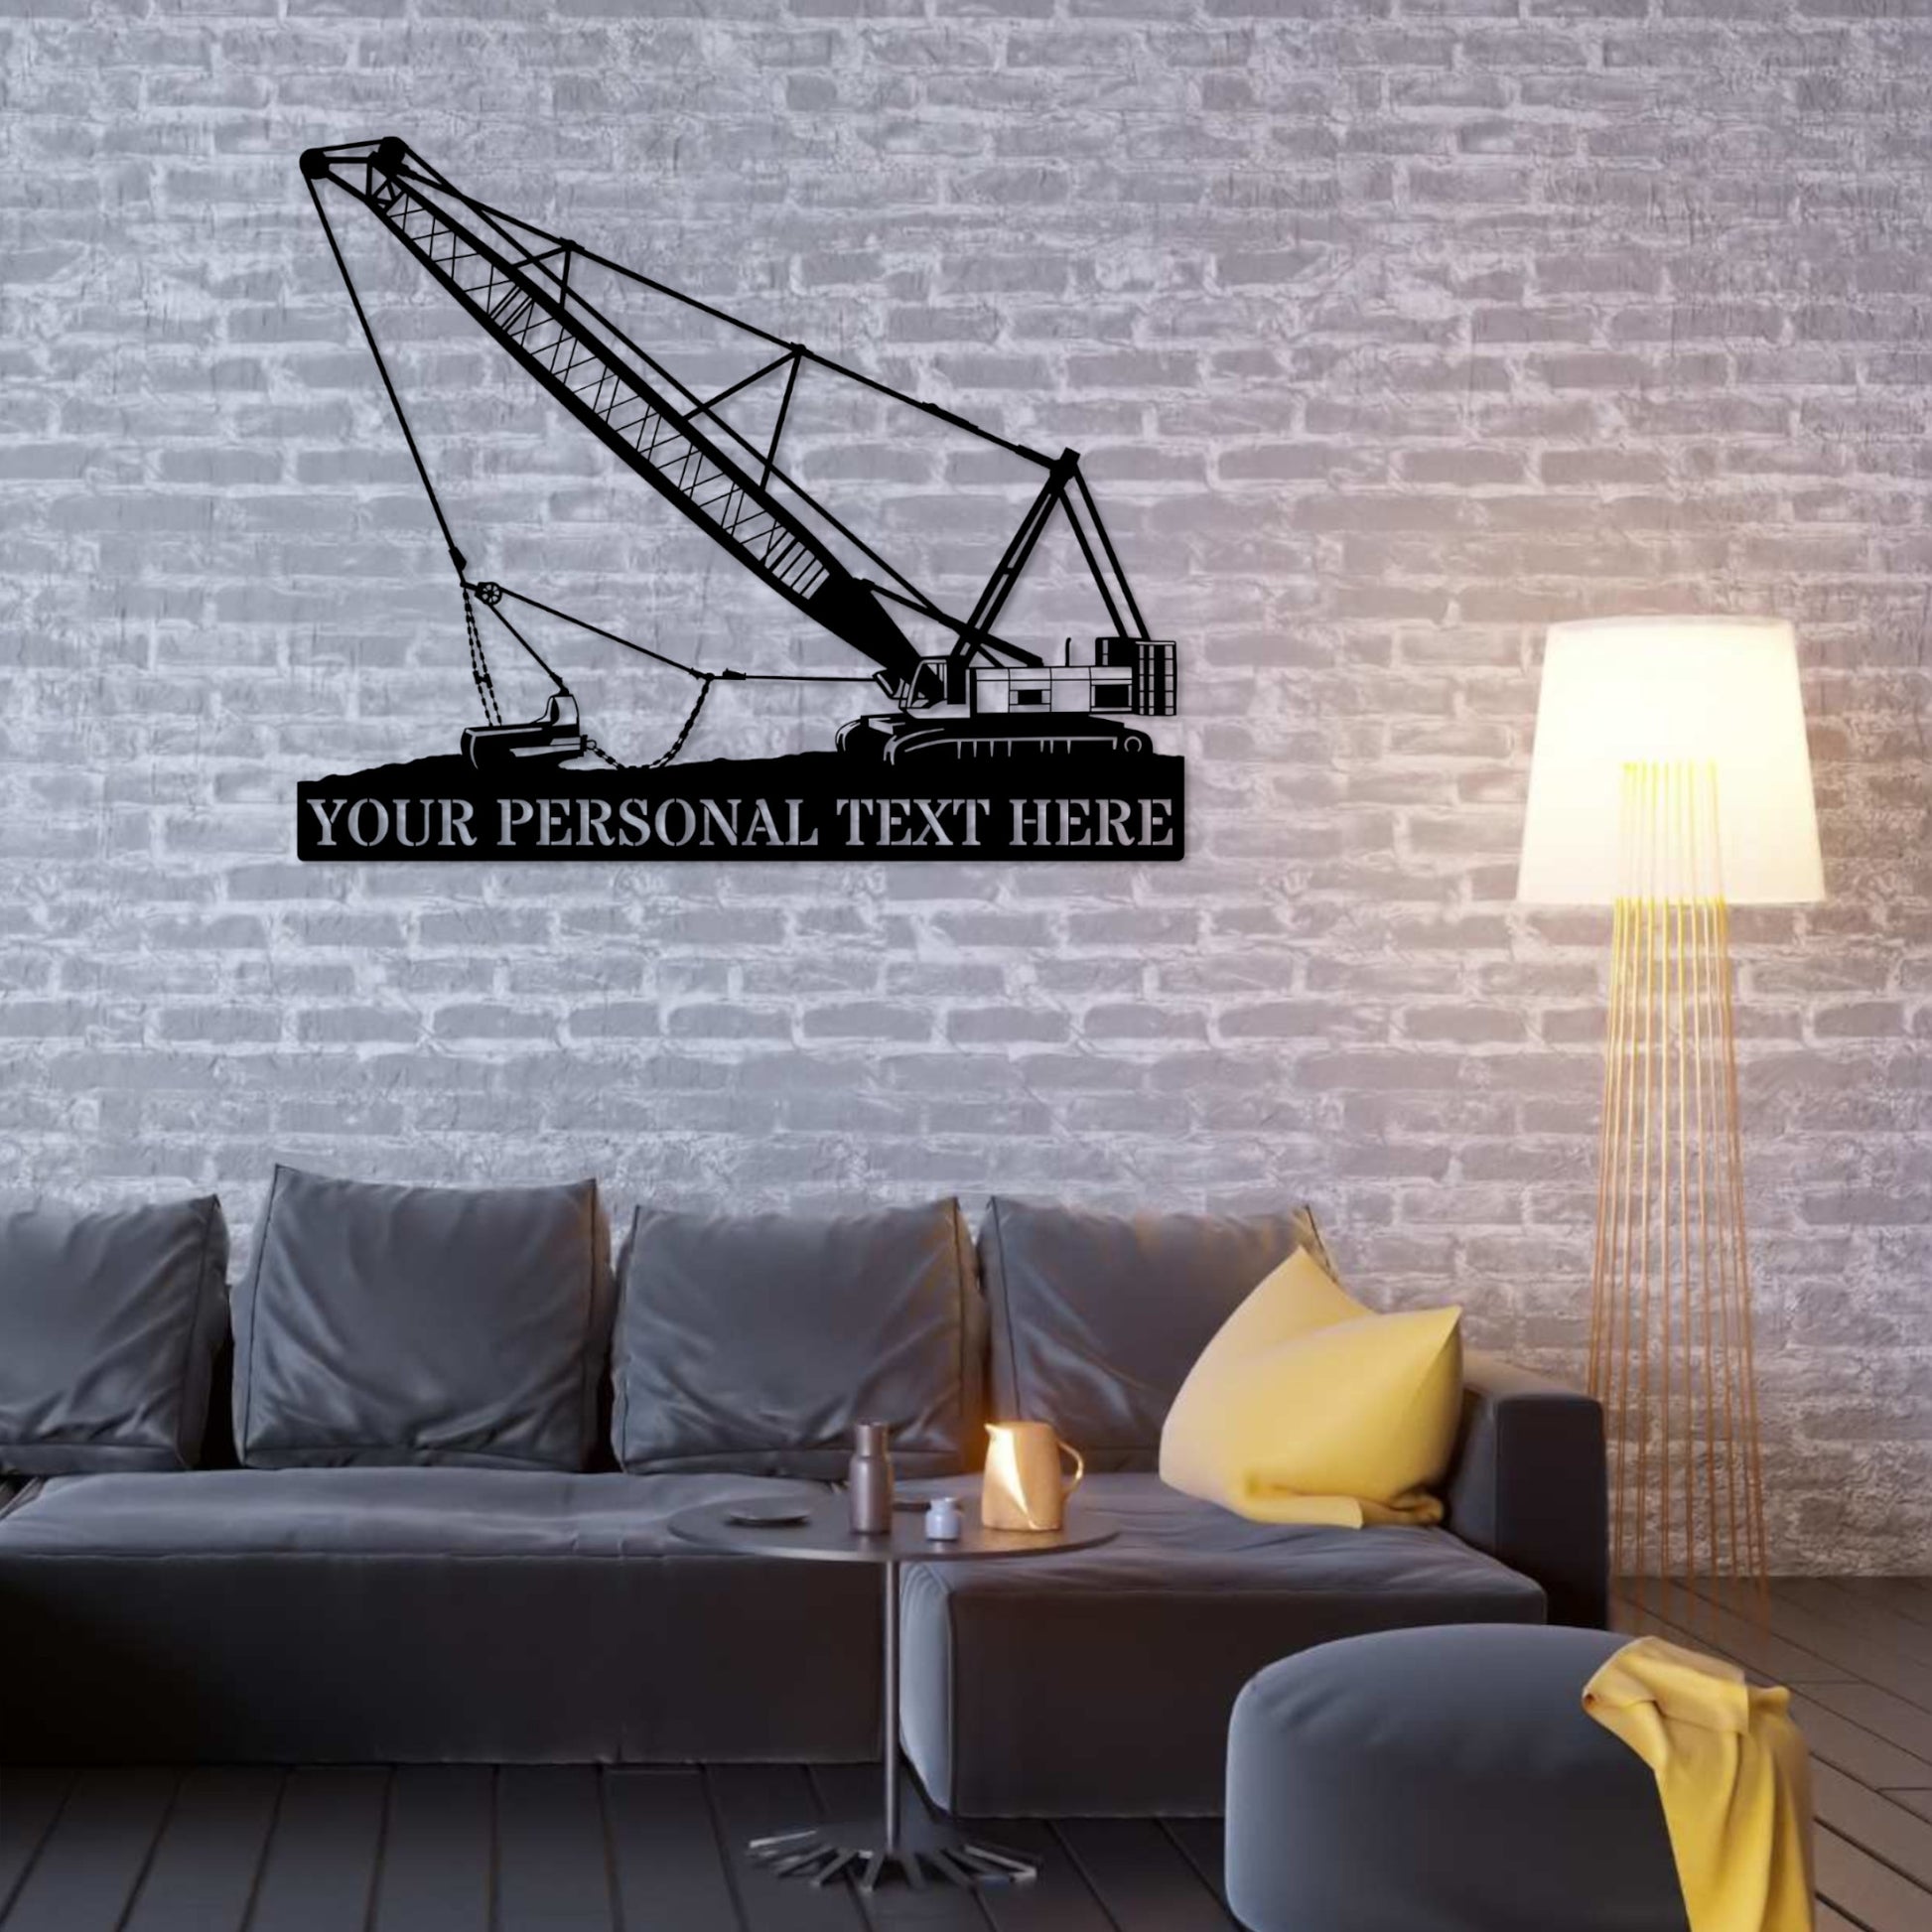 Personalized Dragline Excavator Metal Sign. Custom Earth Mover Operator Wall Hanging Gift. Heavy Machinery Decor. construction Worker Gift